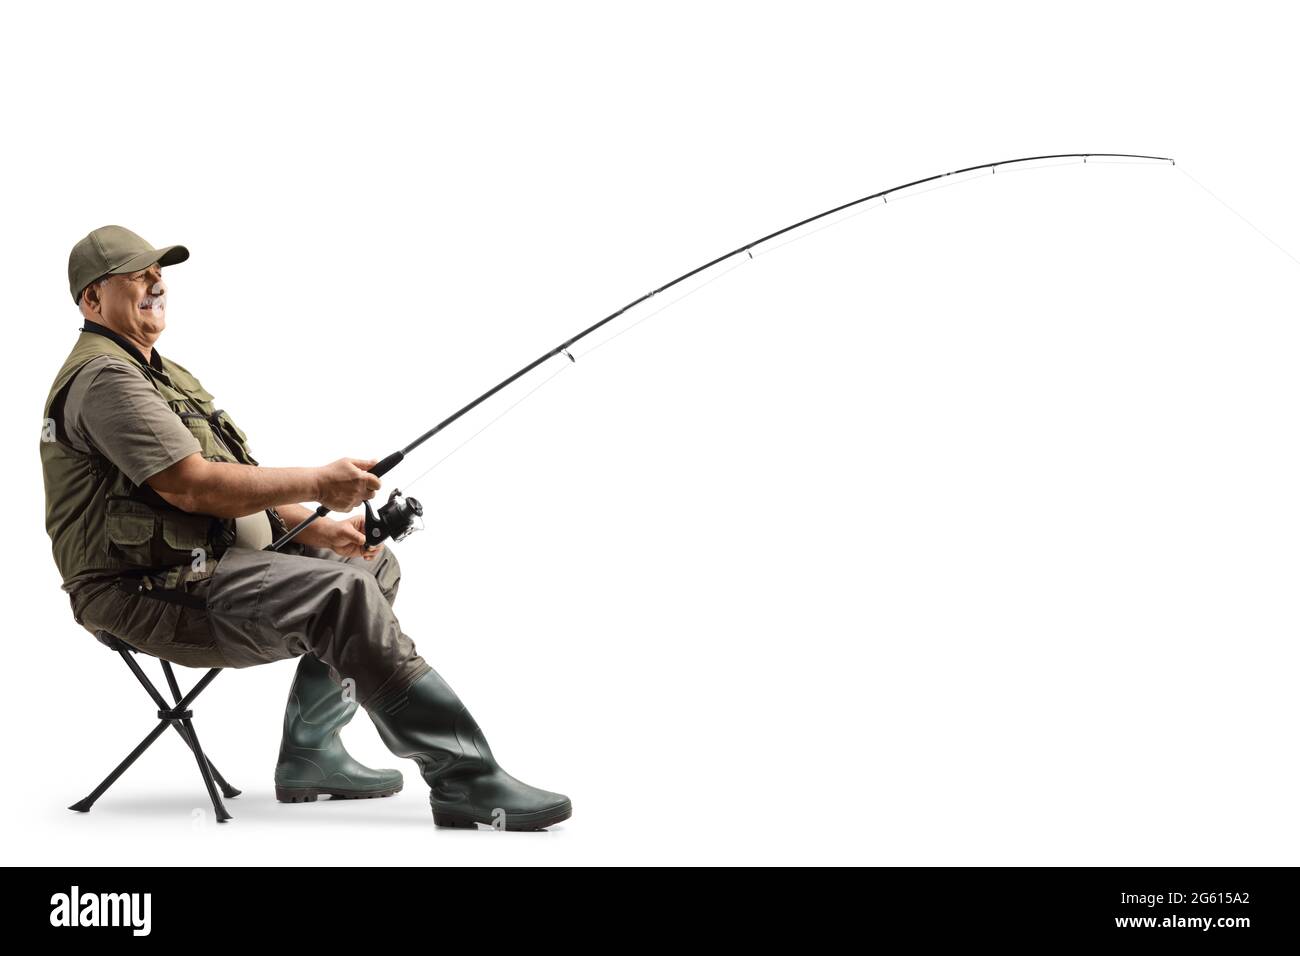 Profile shot of a mature fisherman sitting on a chair with a